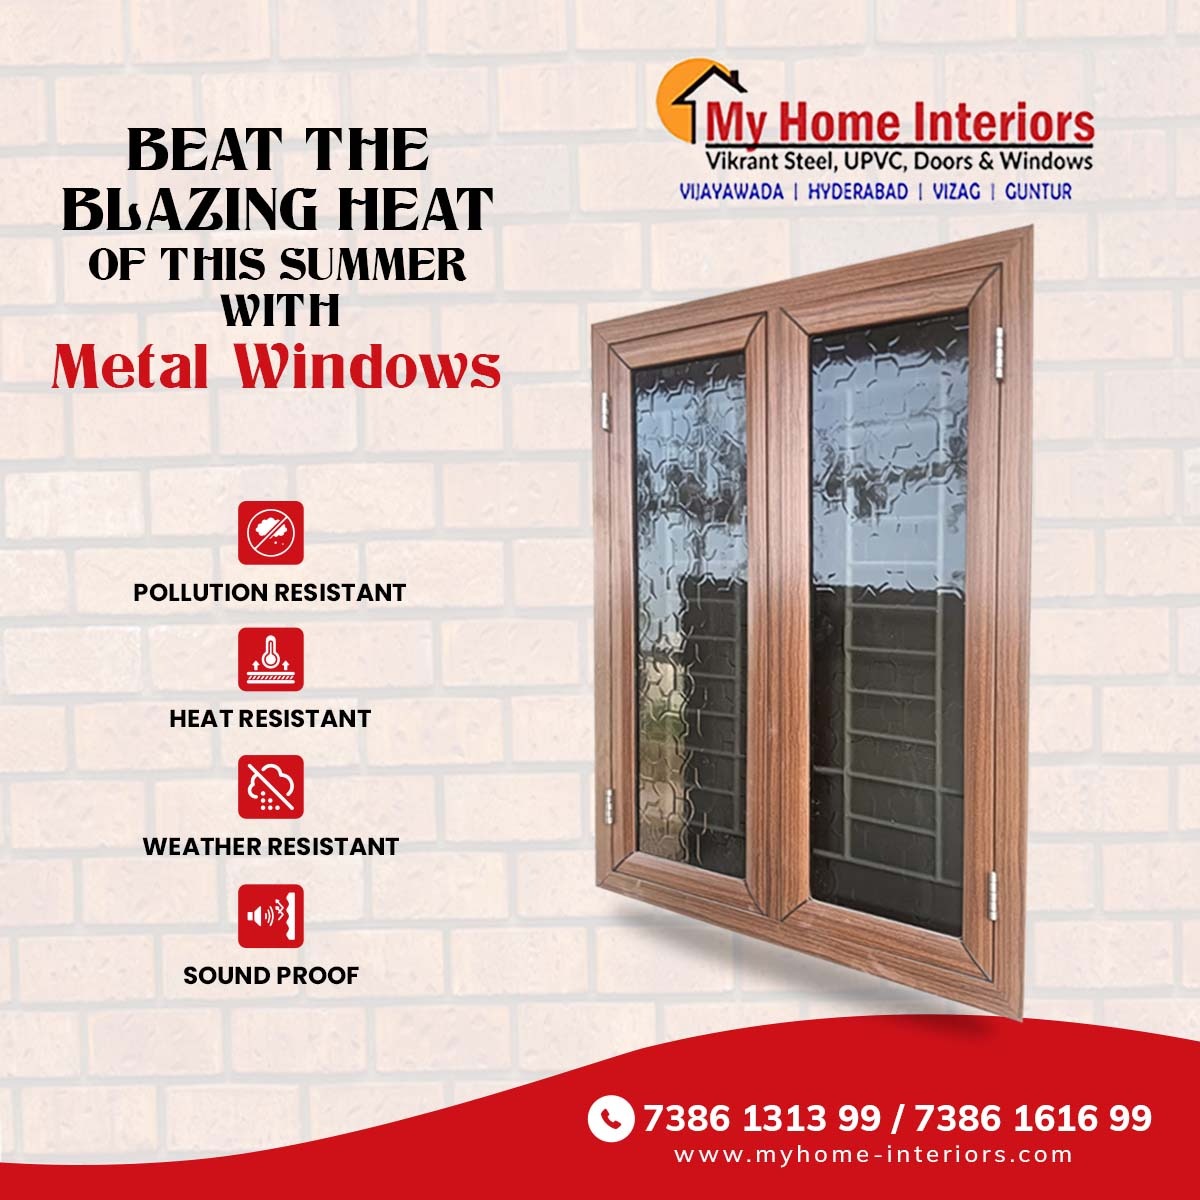 Tired of sweating it out in your home during the scorching summer heat? The solution is as simple as upgrading to metal windows from My Home Interiors 

.
#HomeUpgrade #CoolComfort #EnergyEfficiency #ModernLiving #SleekDesign #sunblocker #IndoorOasis #SummerRelief #StylishSpaces